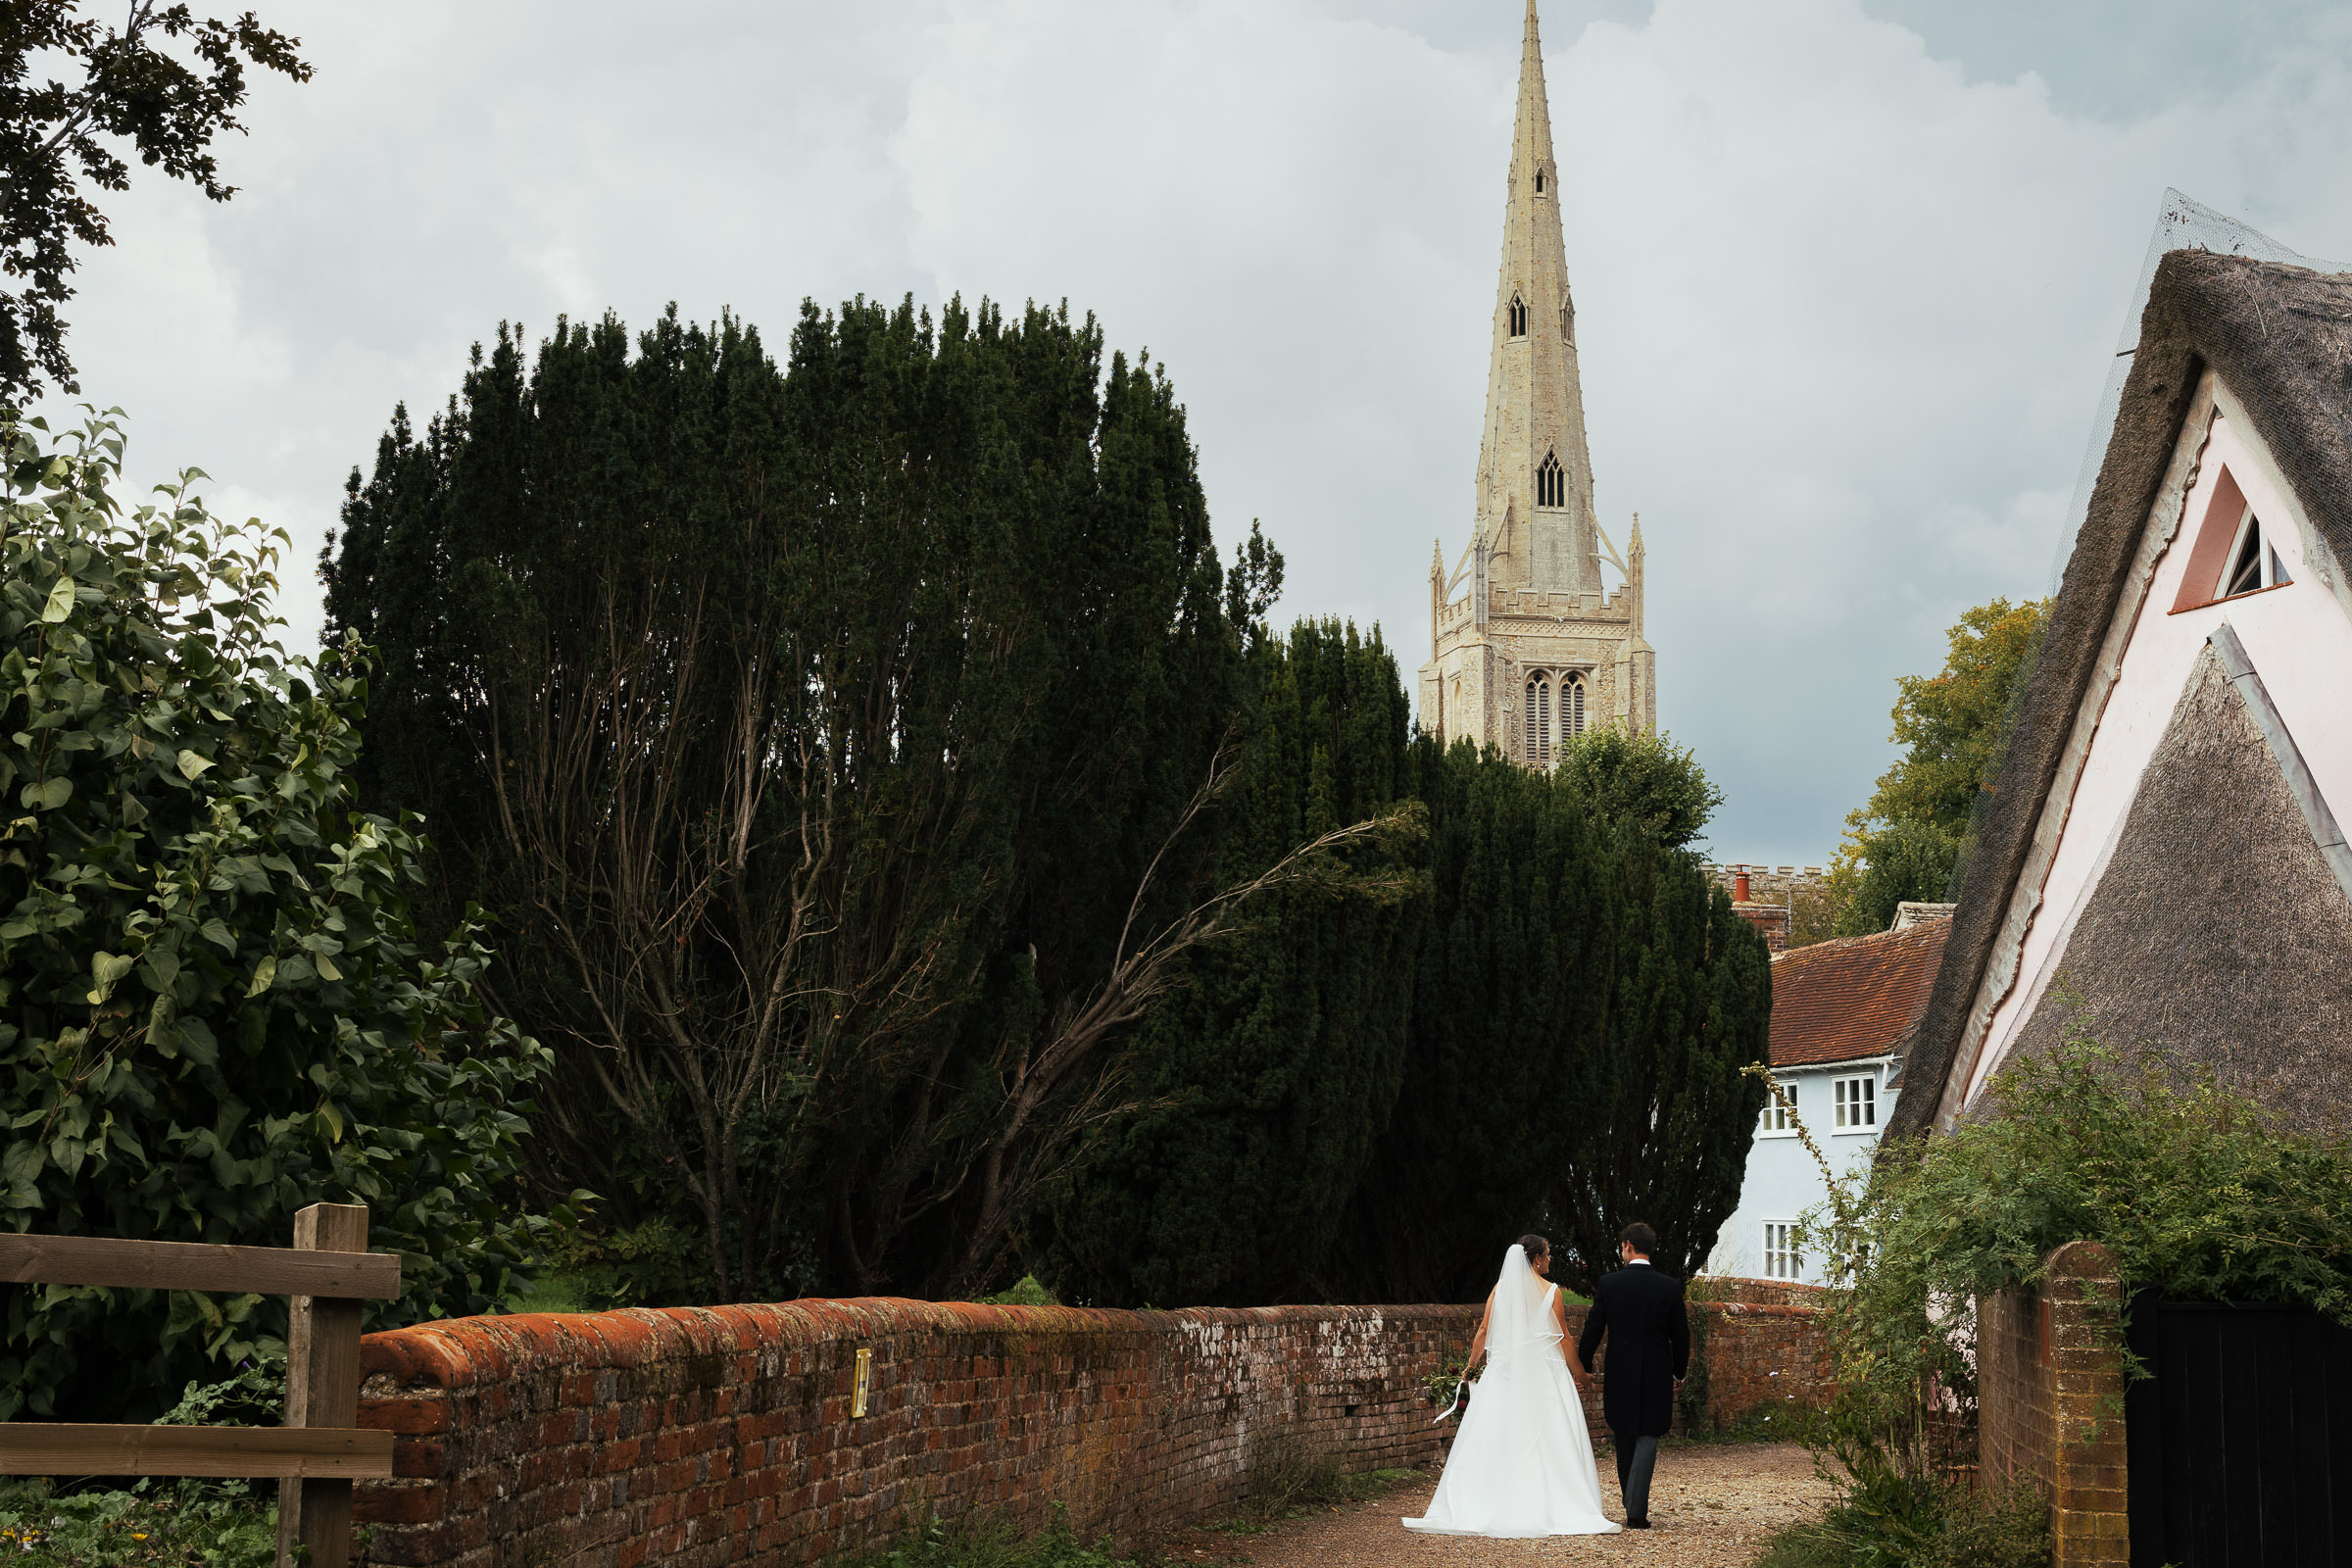 View of newly married couple walking along the lane in Thaxted. The Church of Saint John the Baptist with Our Lady and Saint Laurence in the background, after their wedding.